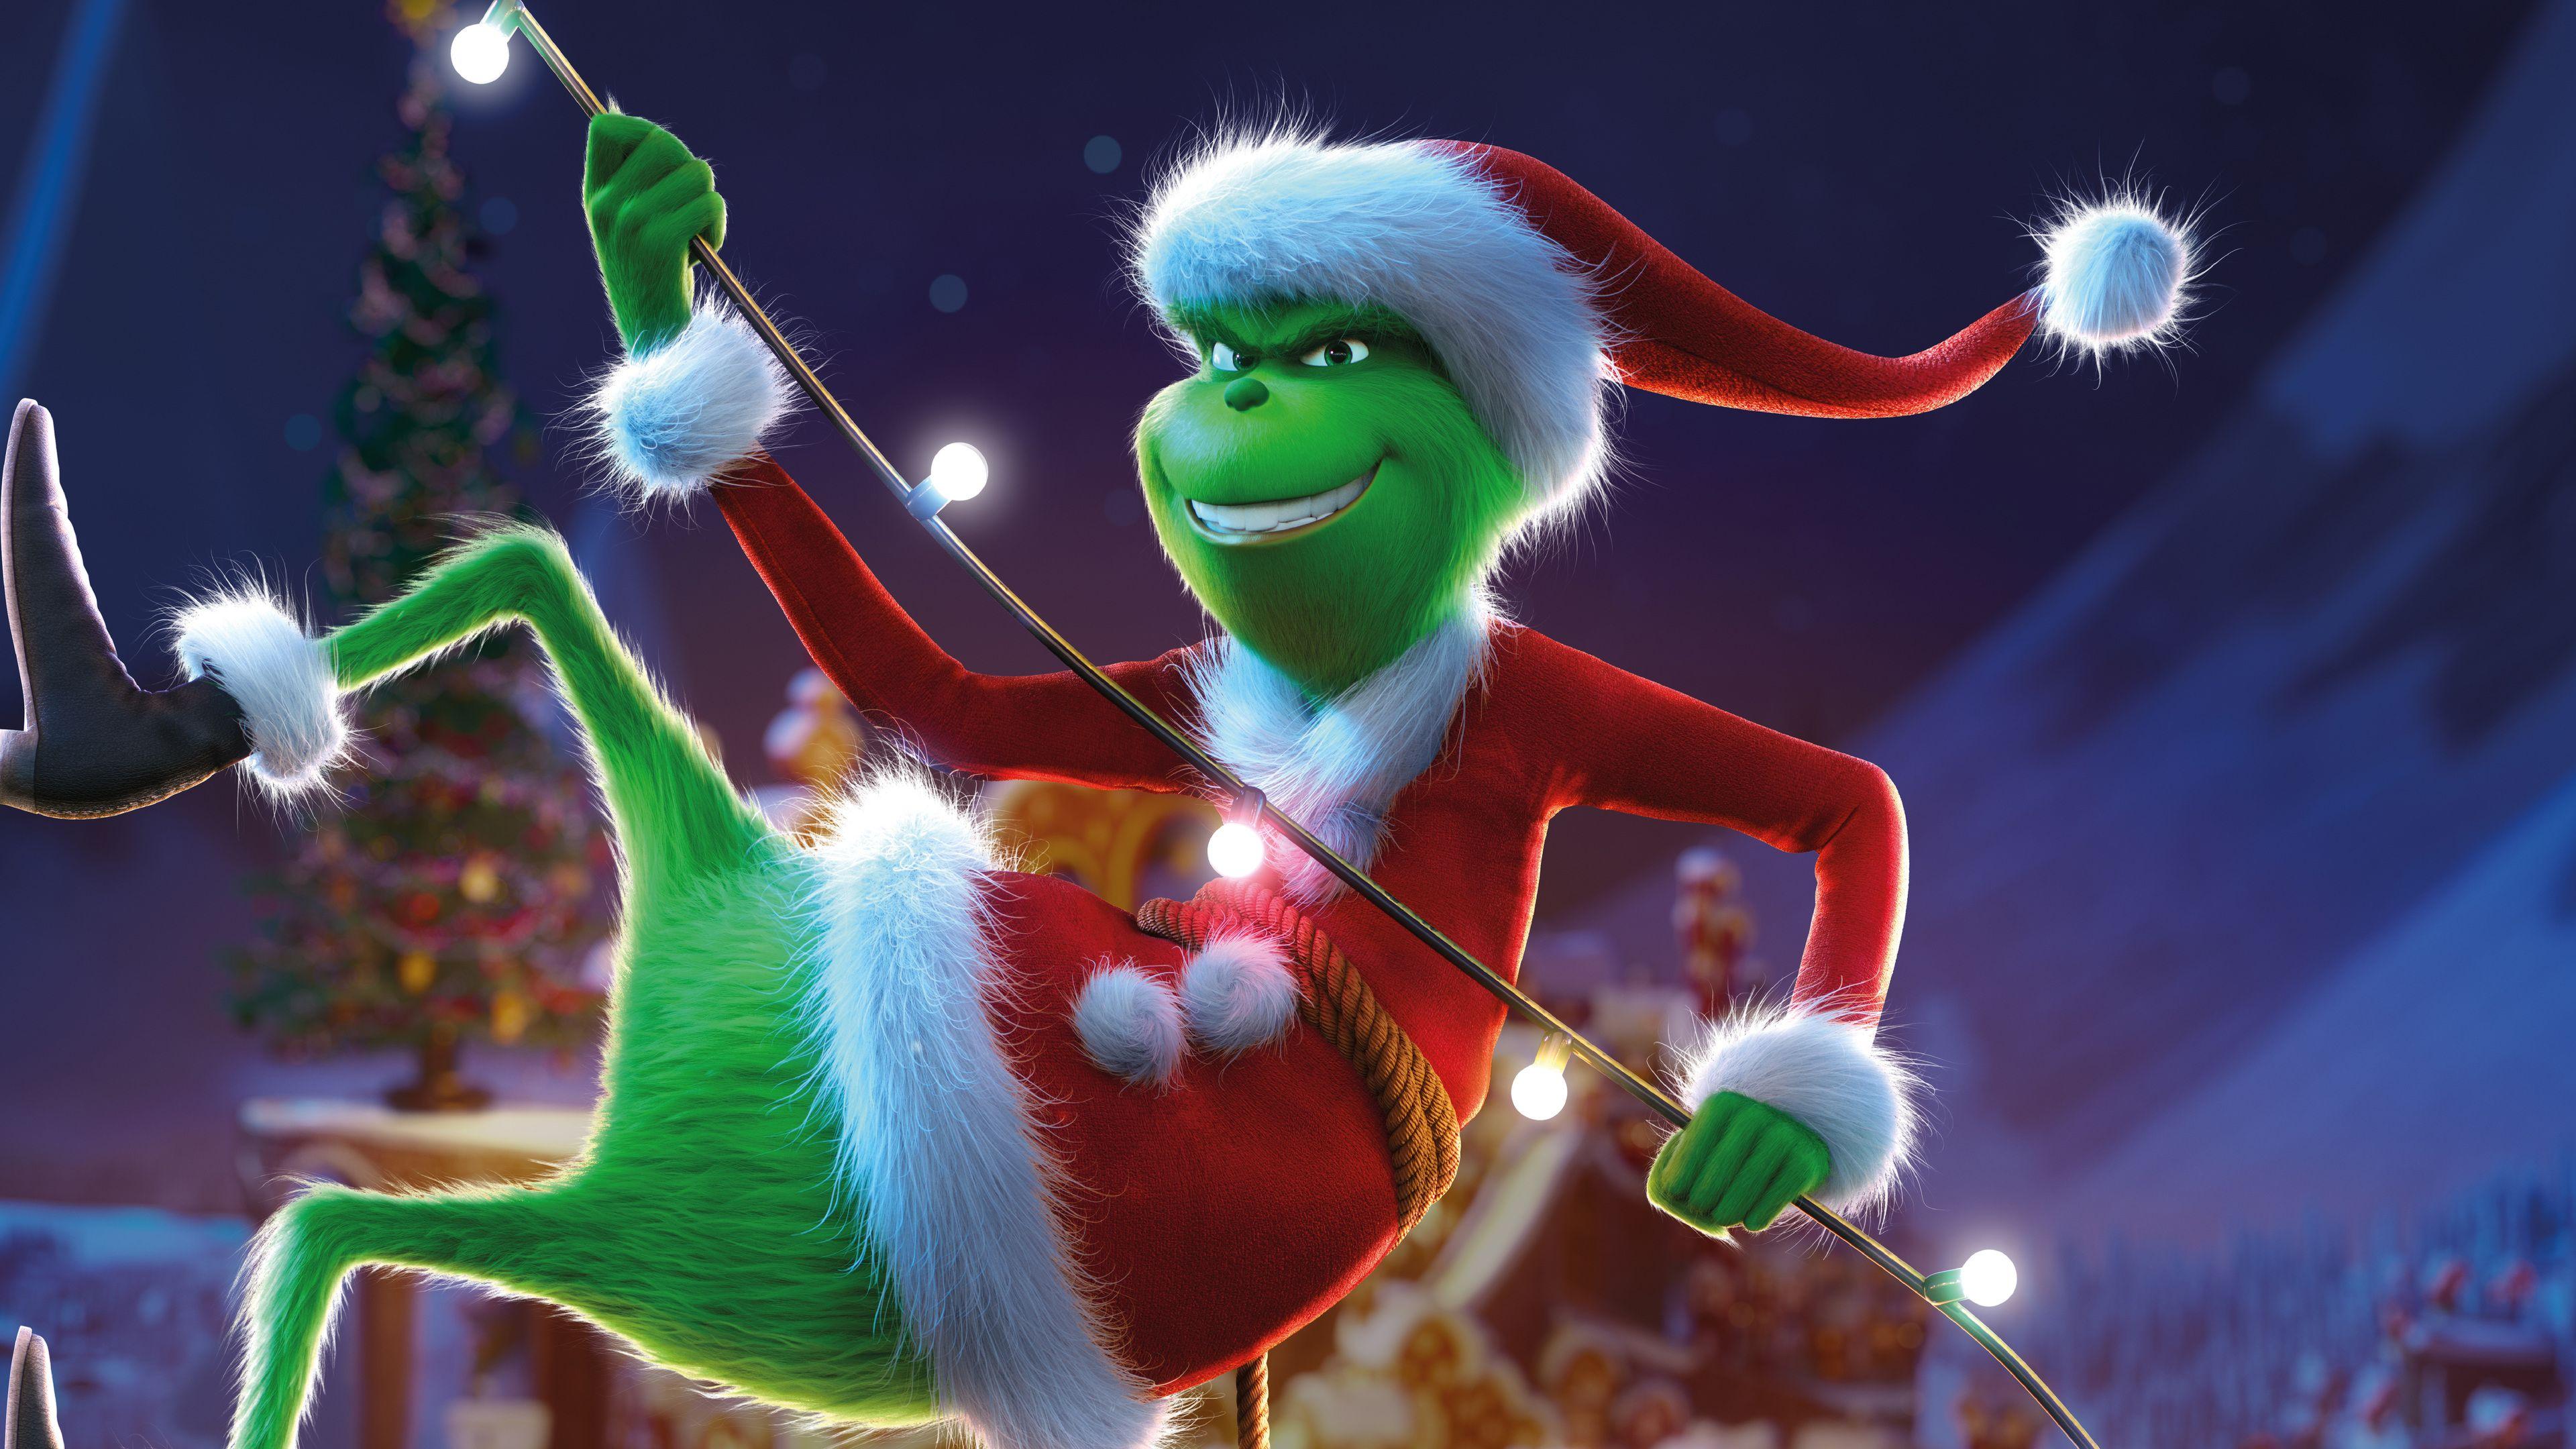 The Grinch 2018 Wallpapers - Wallpaper Cave